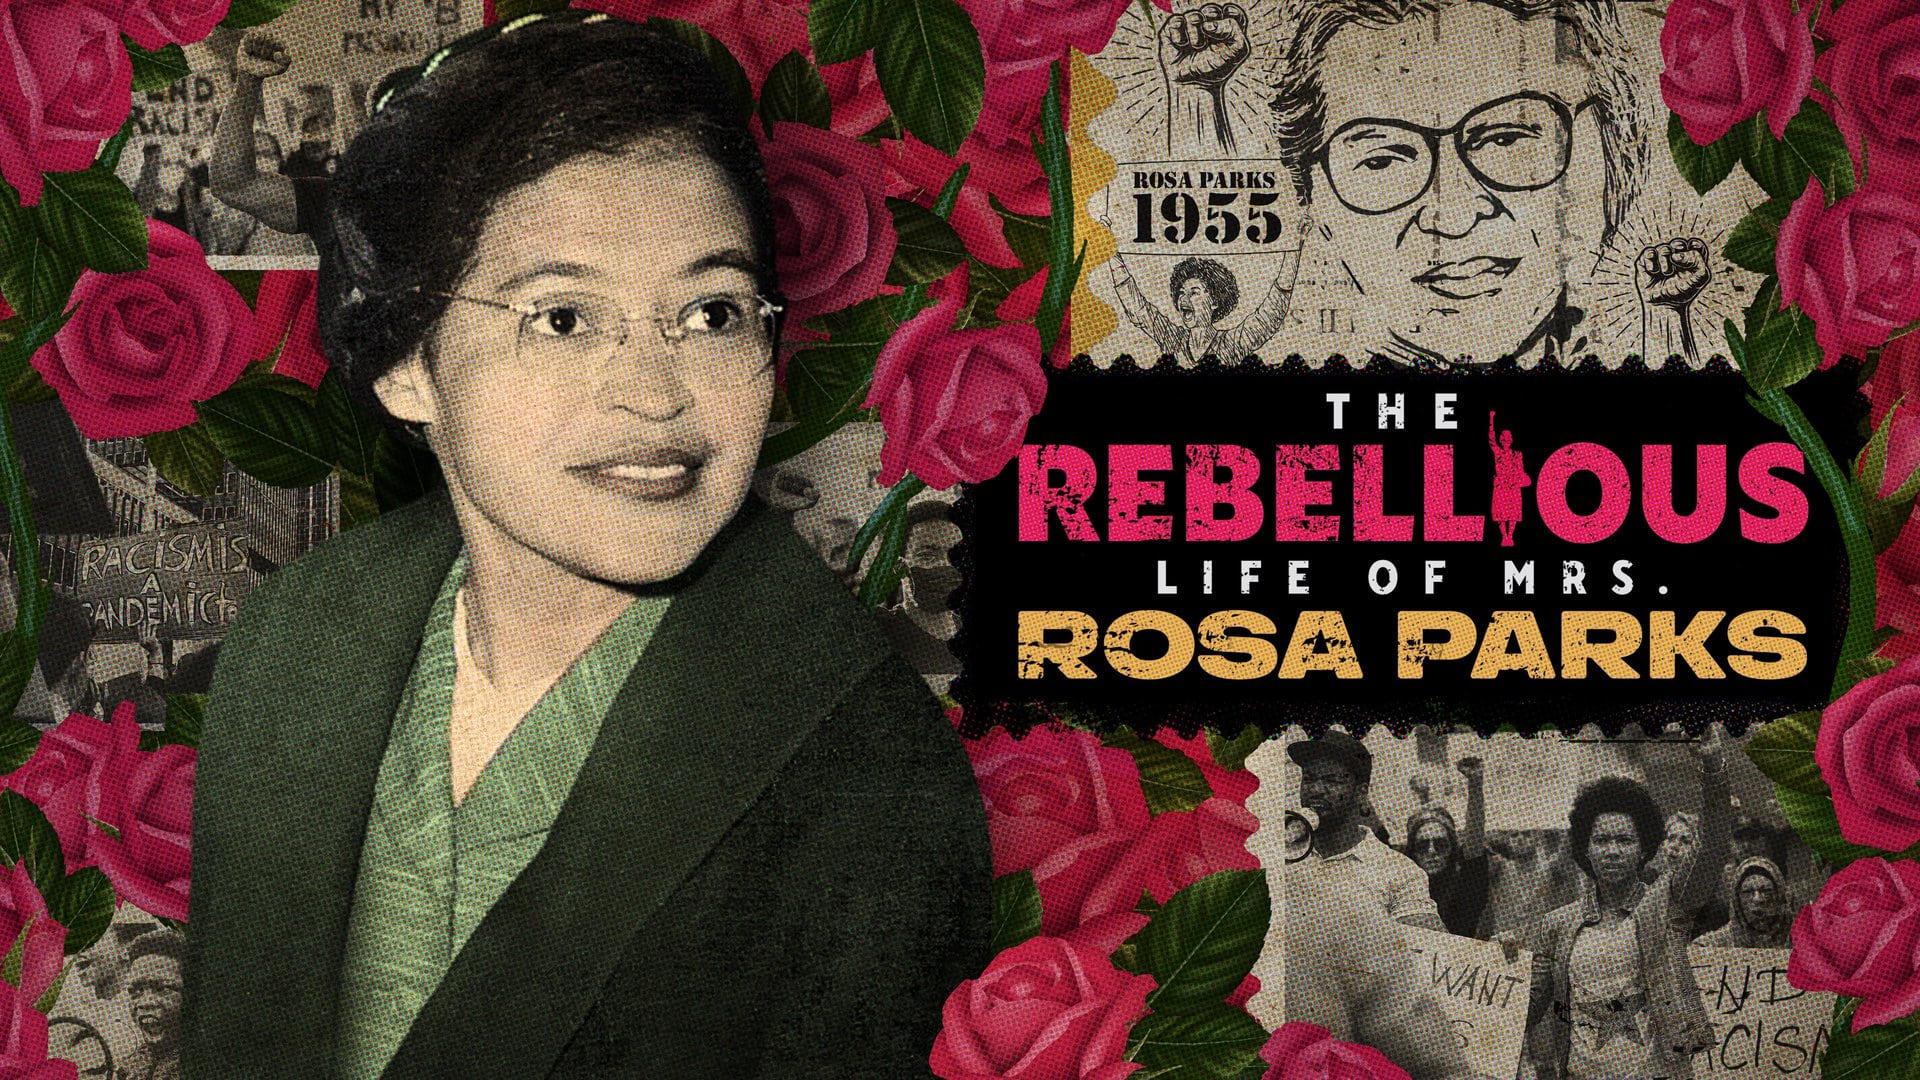 The Rebellious Life of Mrs. Rosa Parks backdrop